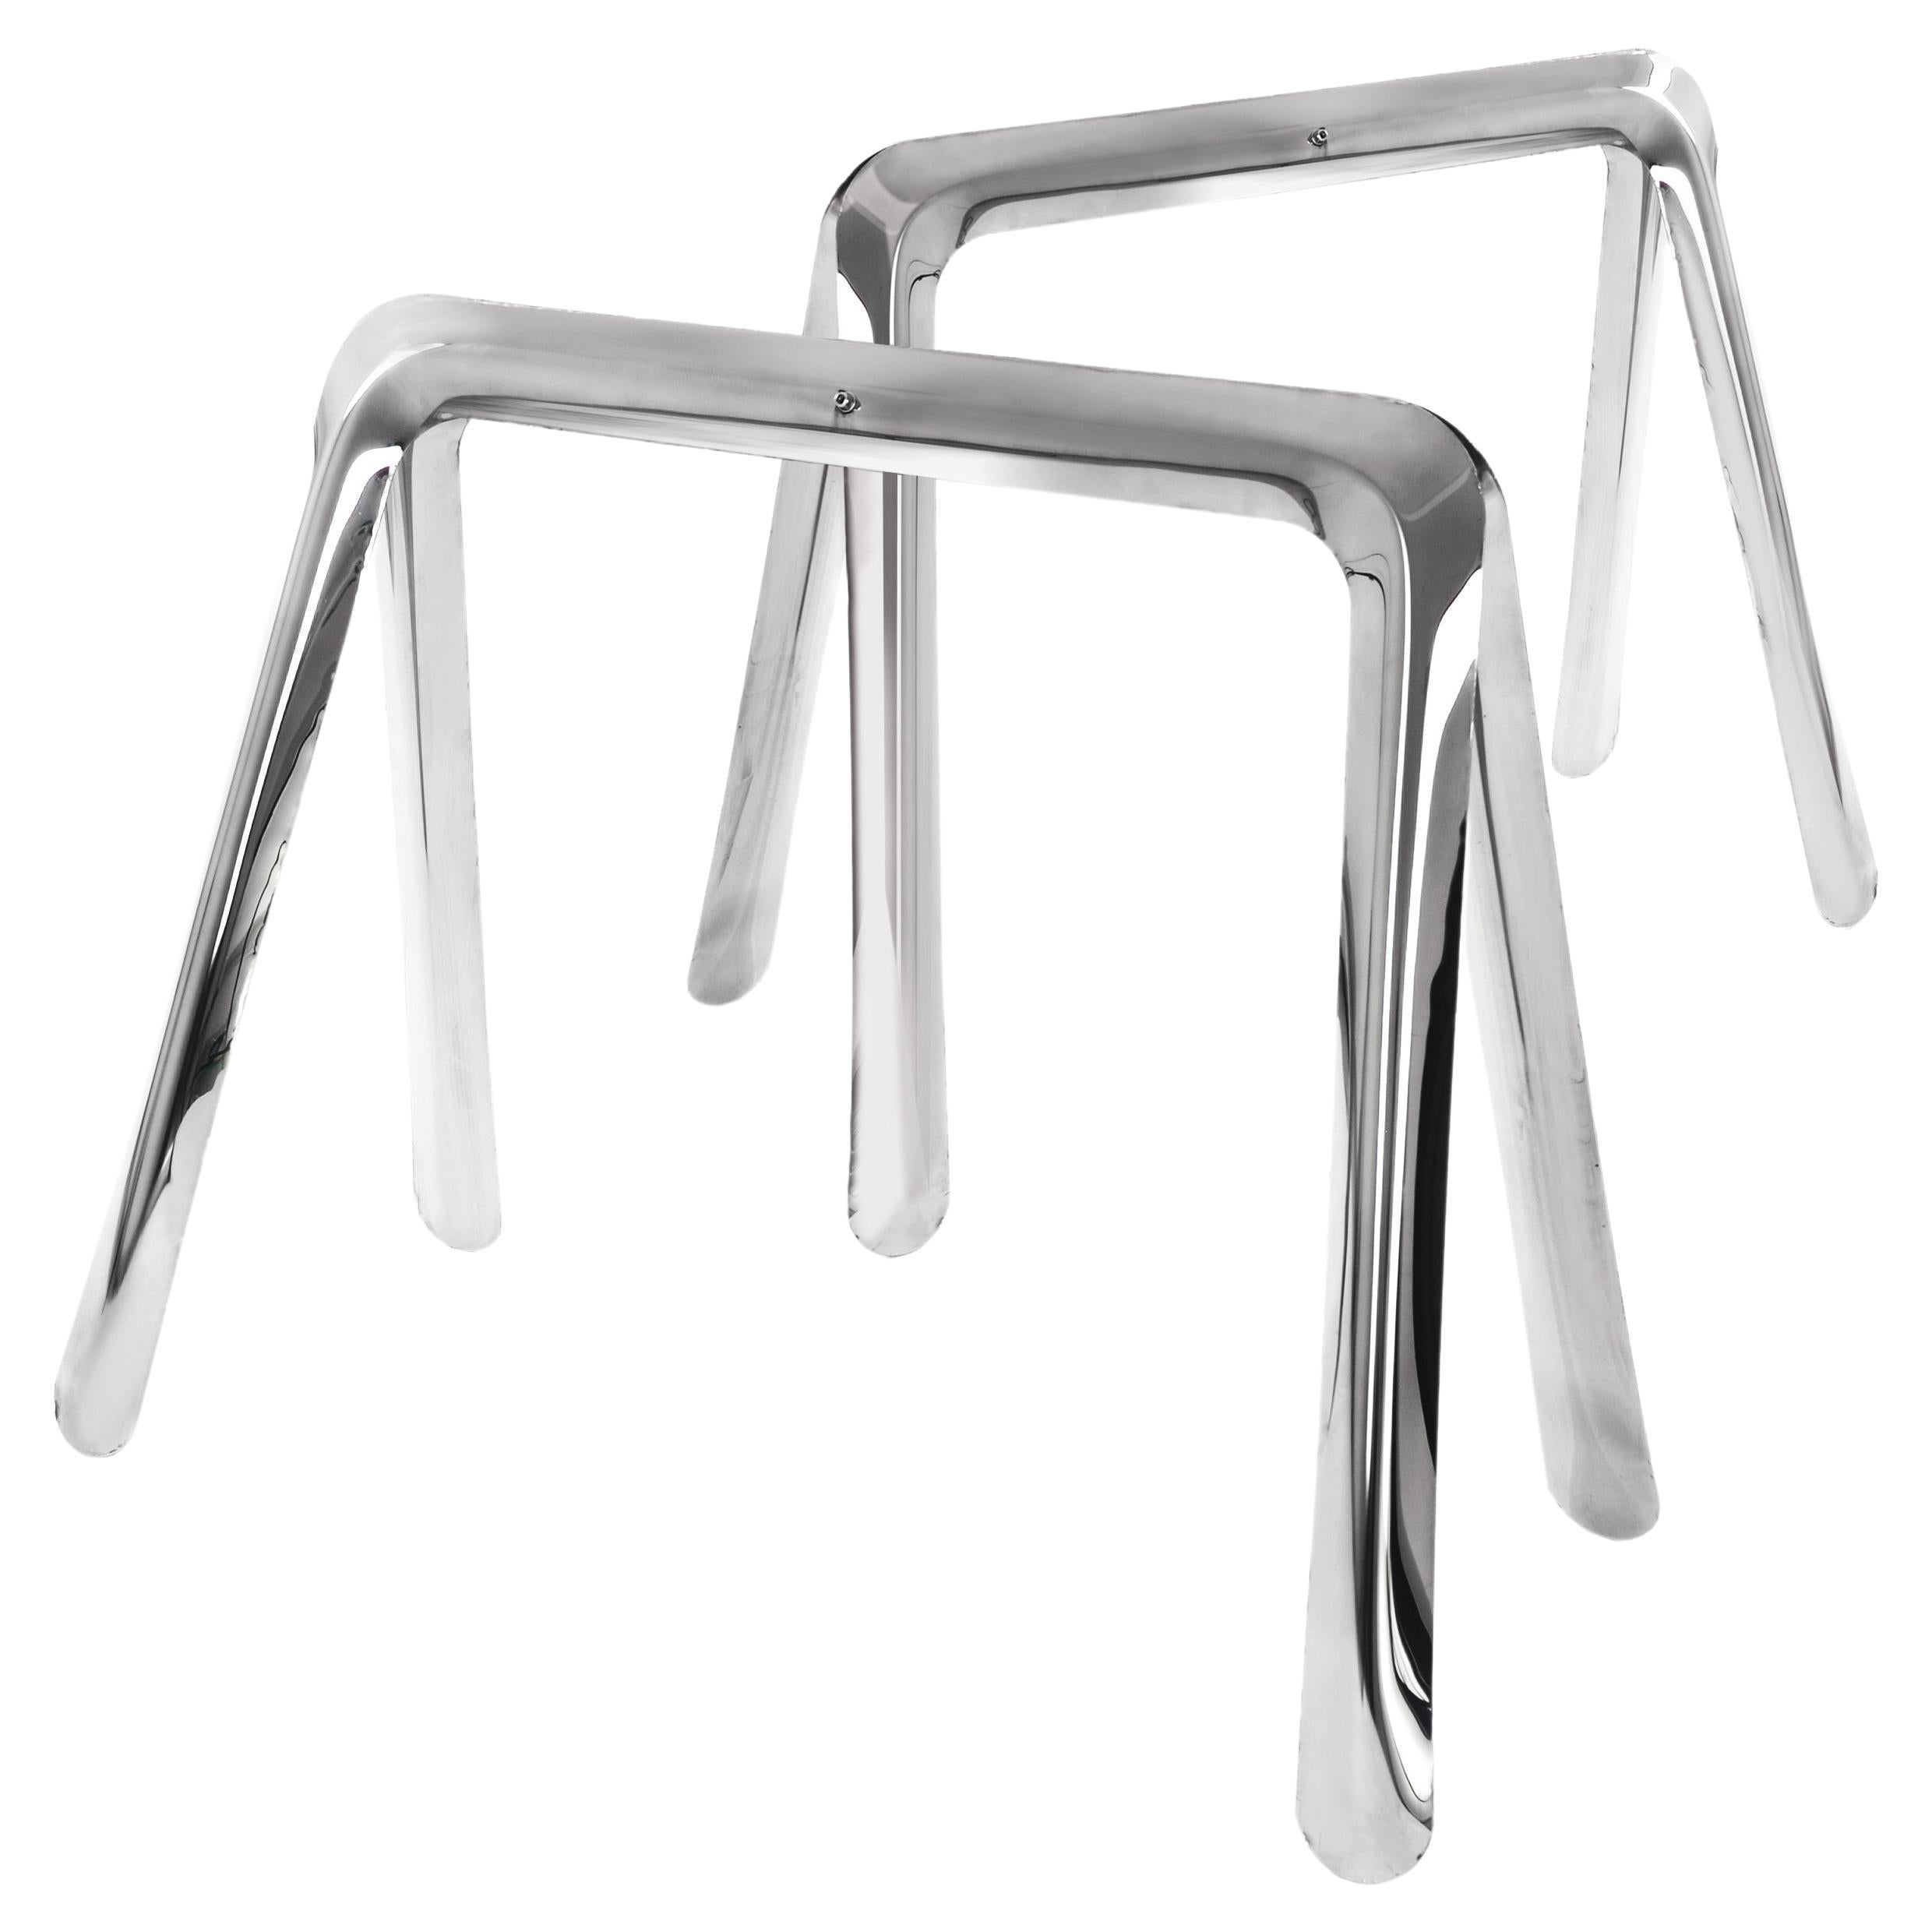 Pair of Koza Trestles in Stainless Steel by Zieta For Sale